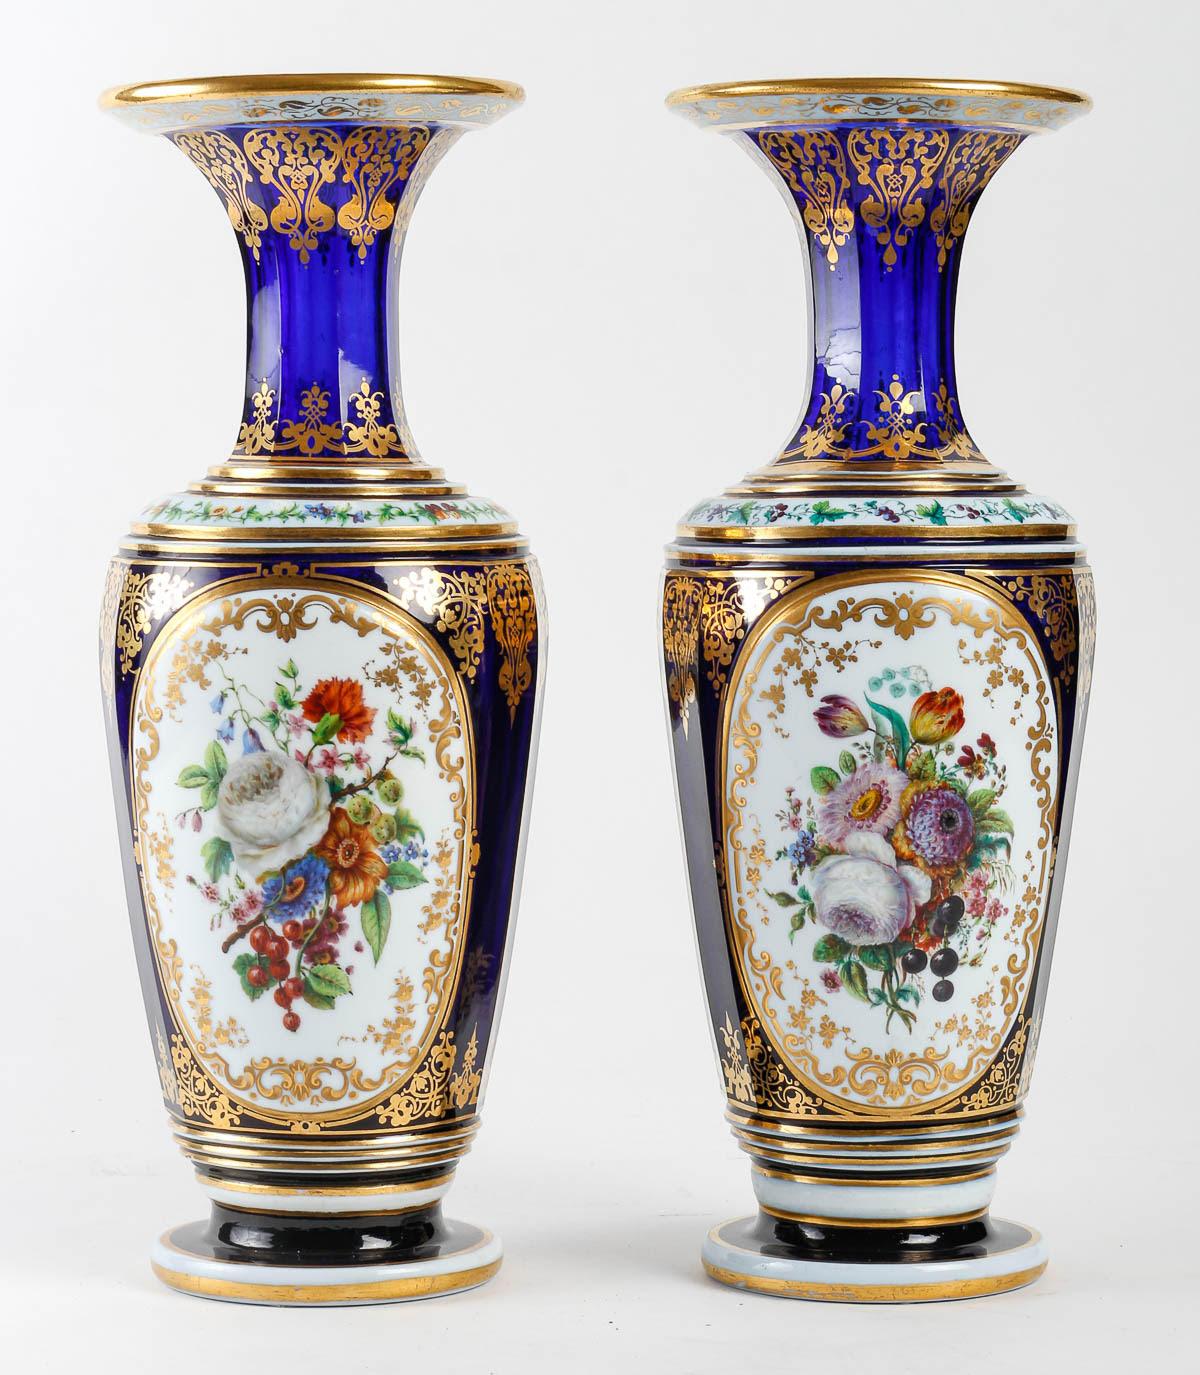 Gilt Pair of Baccarat Crystal and Painted Opaline Vases, Napoleon III Period. For Sale